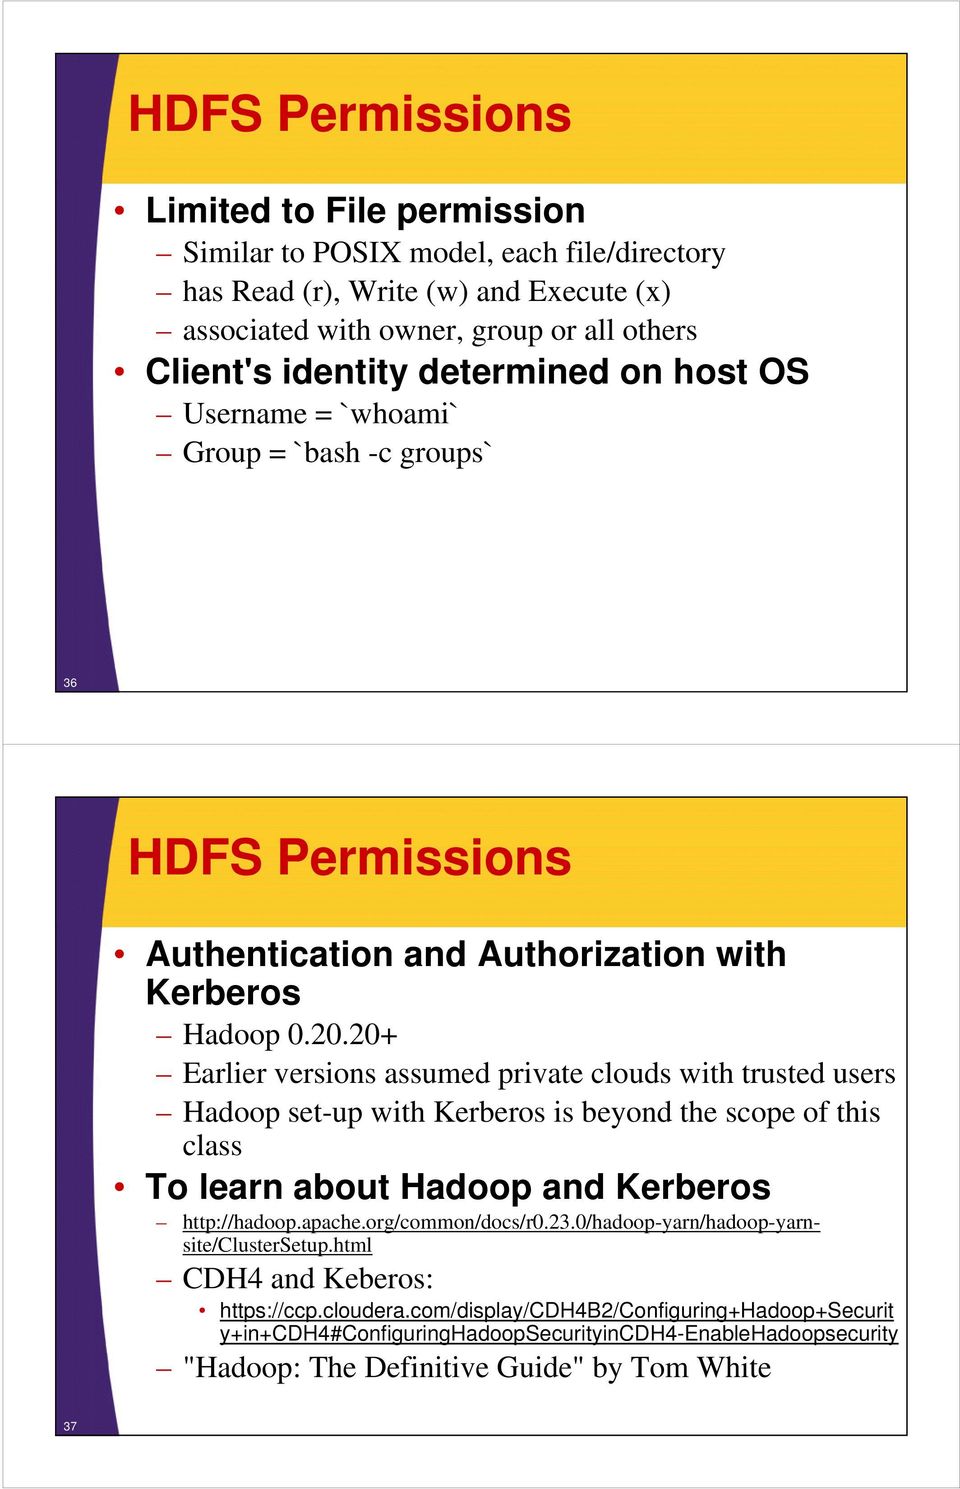 20+ Earlier versions assumed private clouds with trusted users Hadoop set-up with Kerberos is beyond the scope of this class To learn about Hadoop and Kerberos http://hadoop.apache.